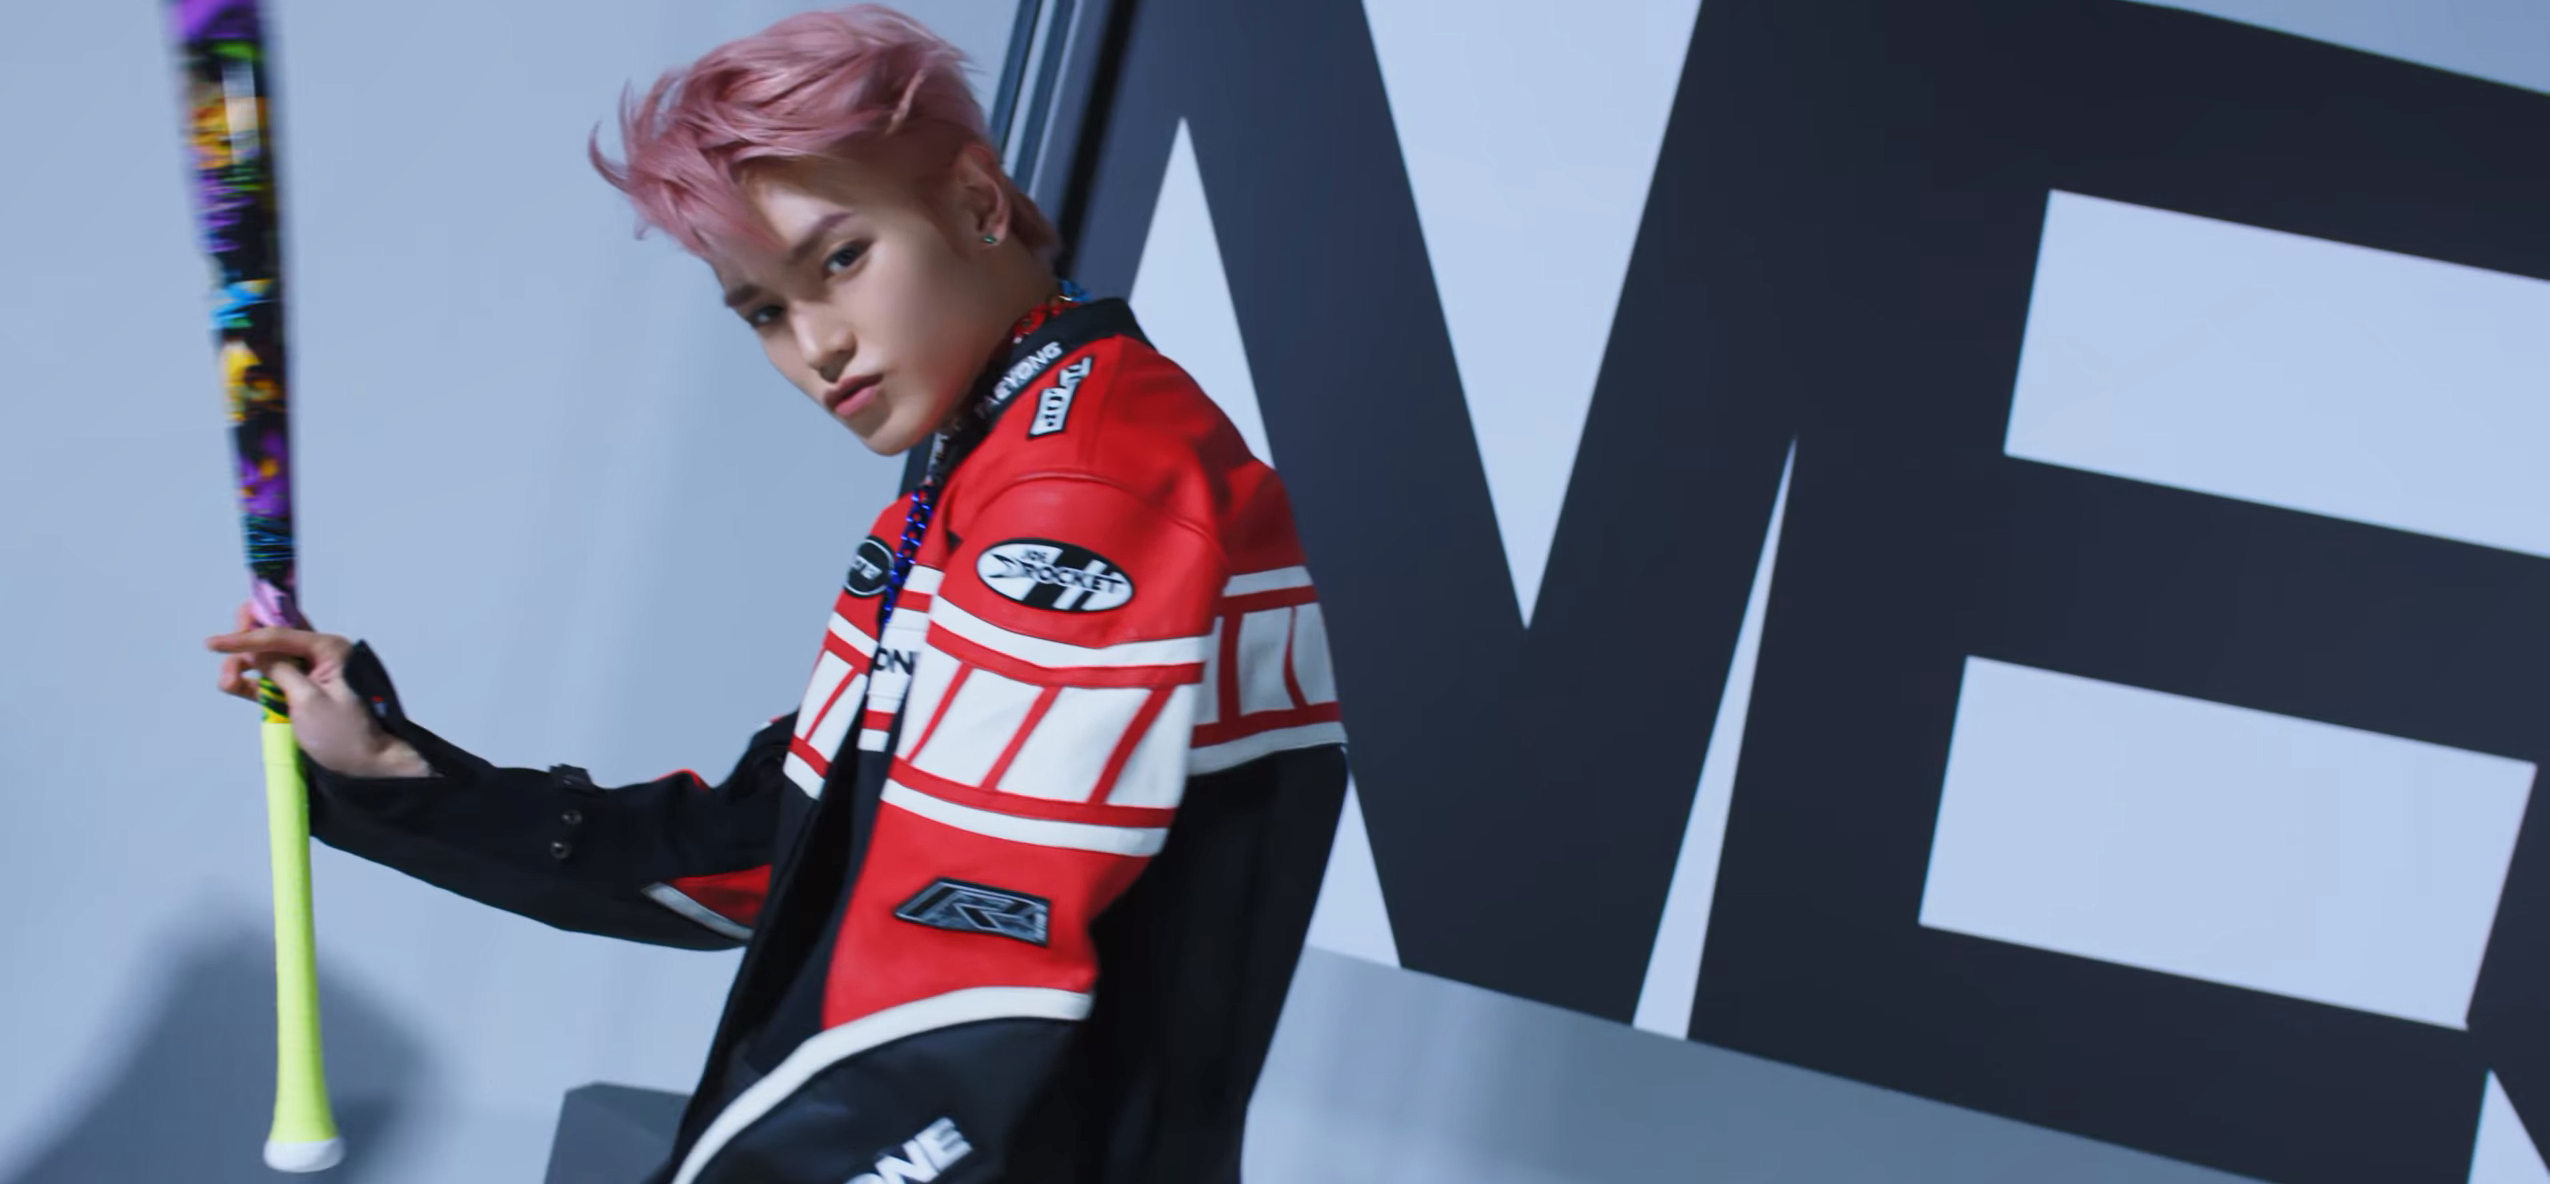 NCT 127 - Simon Says (Doyoung, Jungwoo, Taeil Teaser Images) : r/kpop